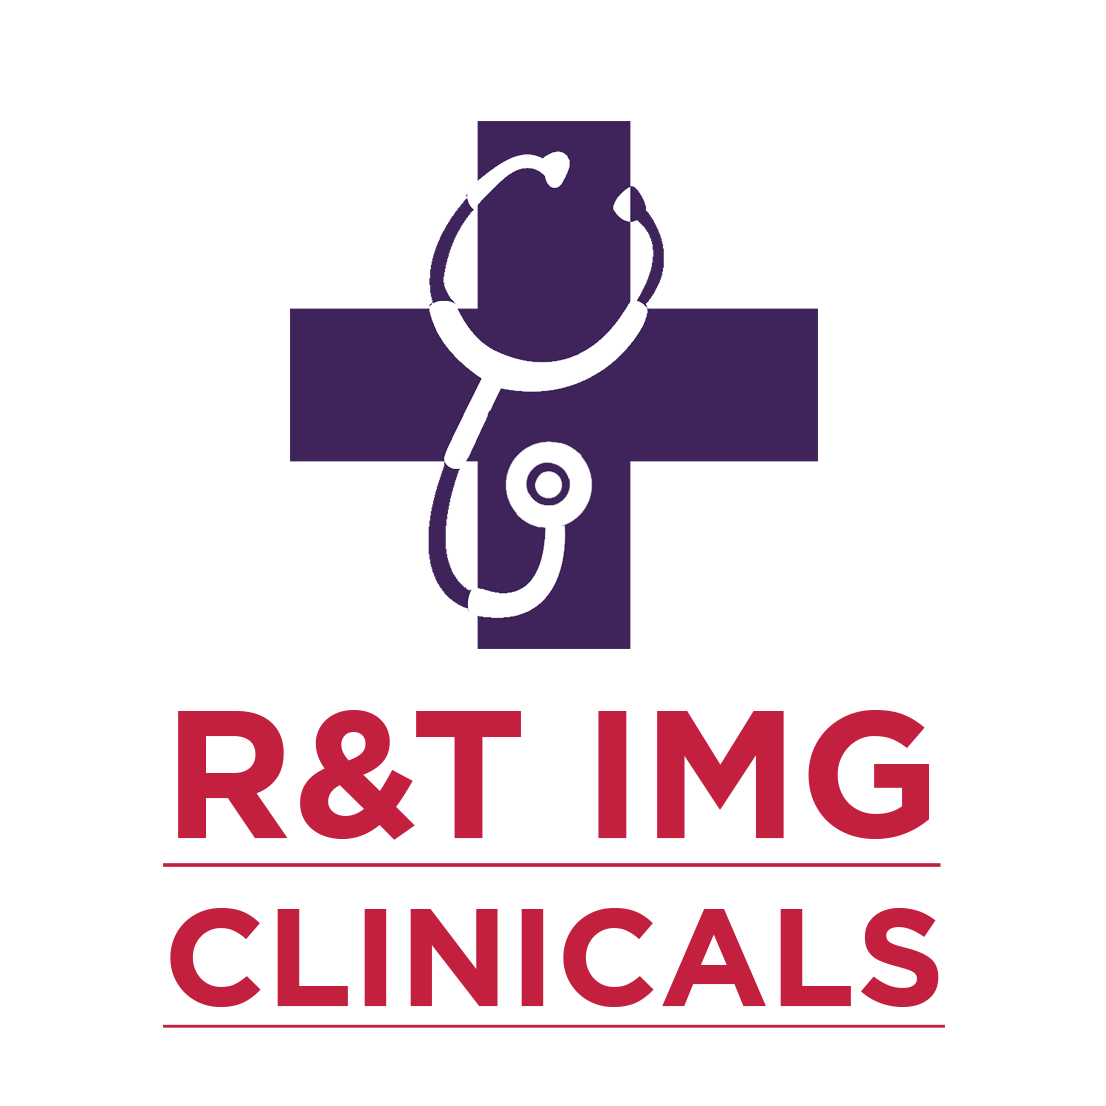 R&T IMG Clinicals is a Physician Innovation Network collaborator.